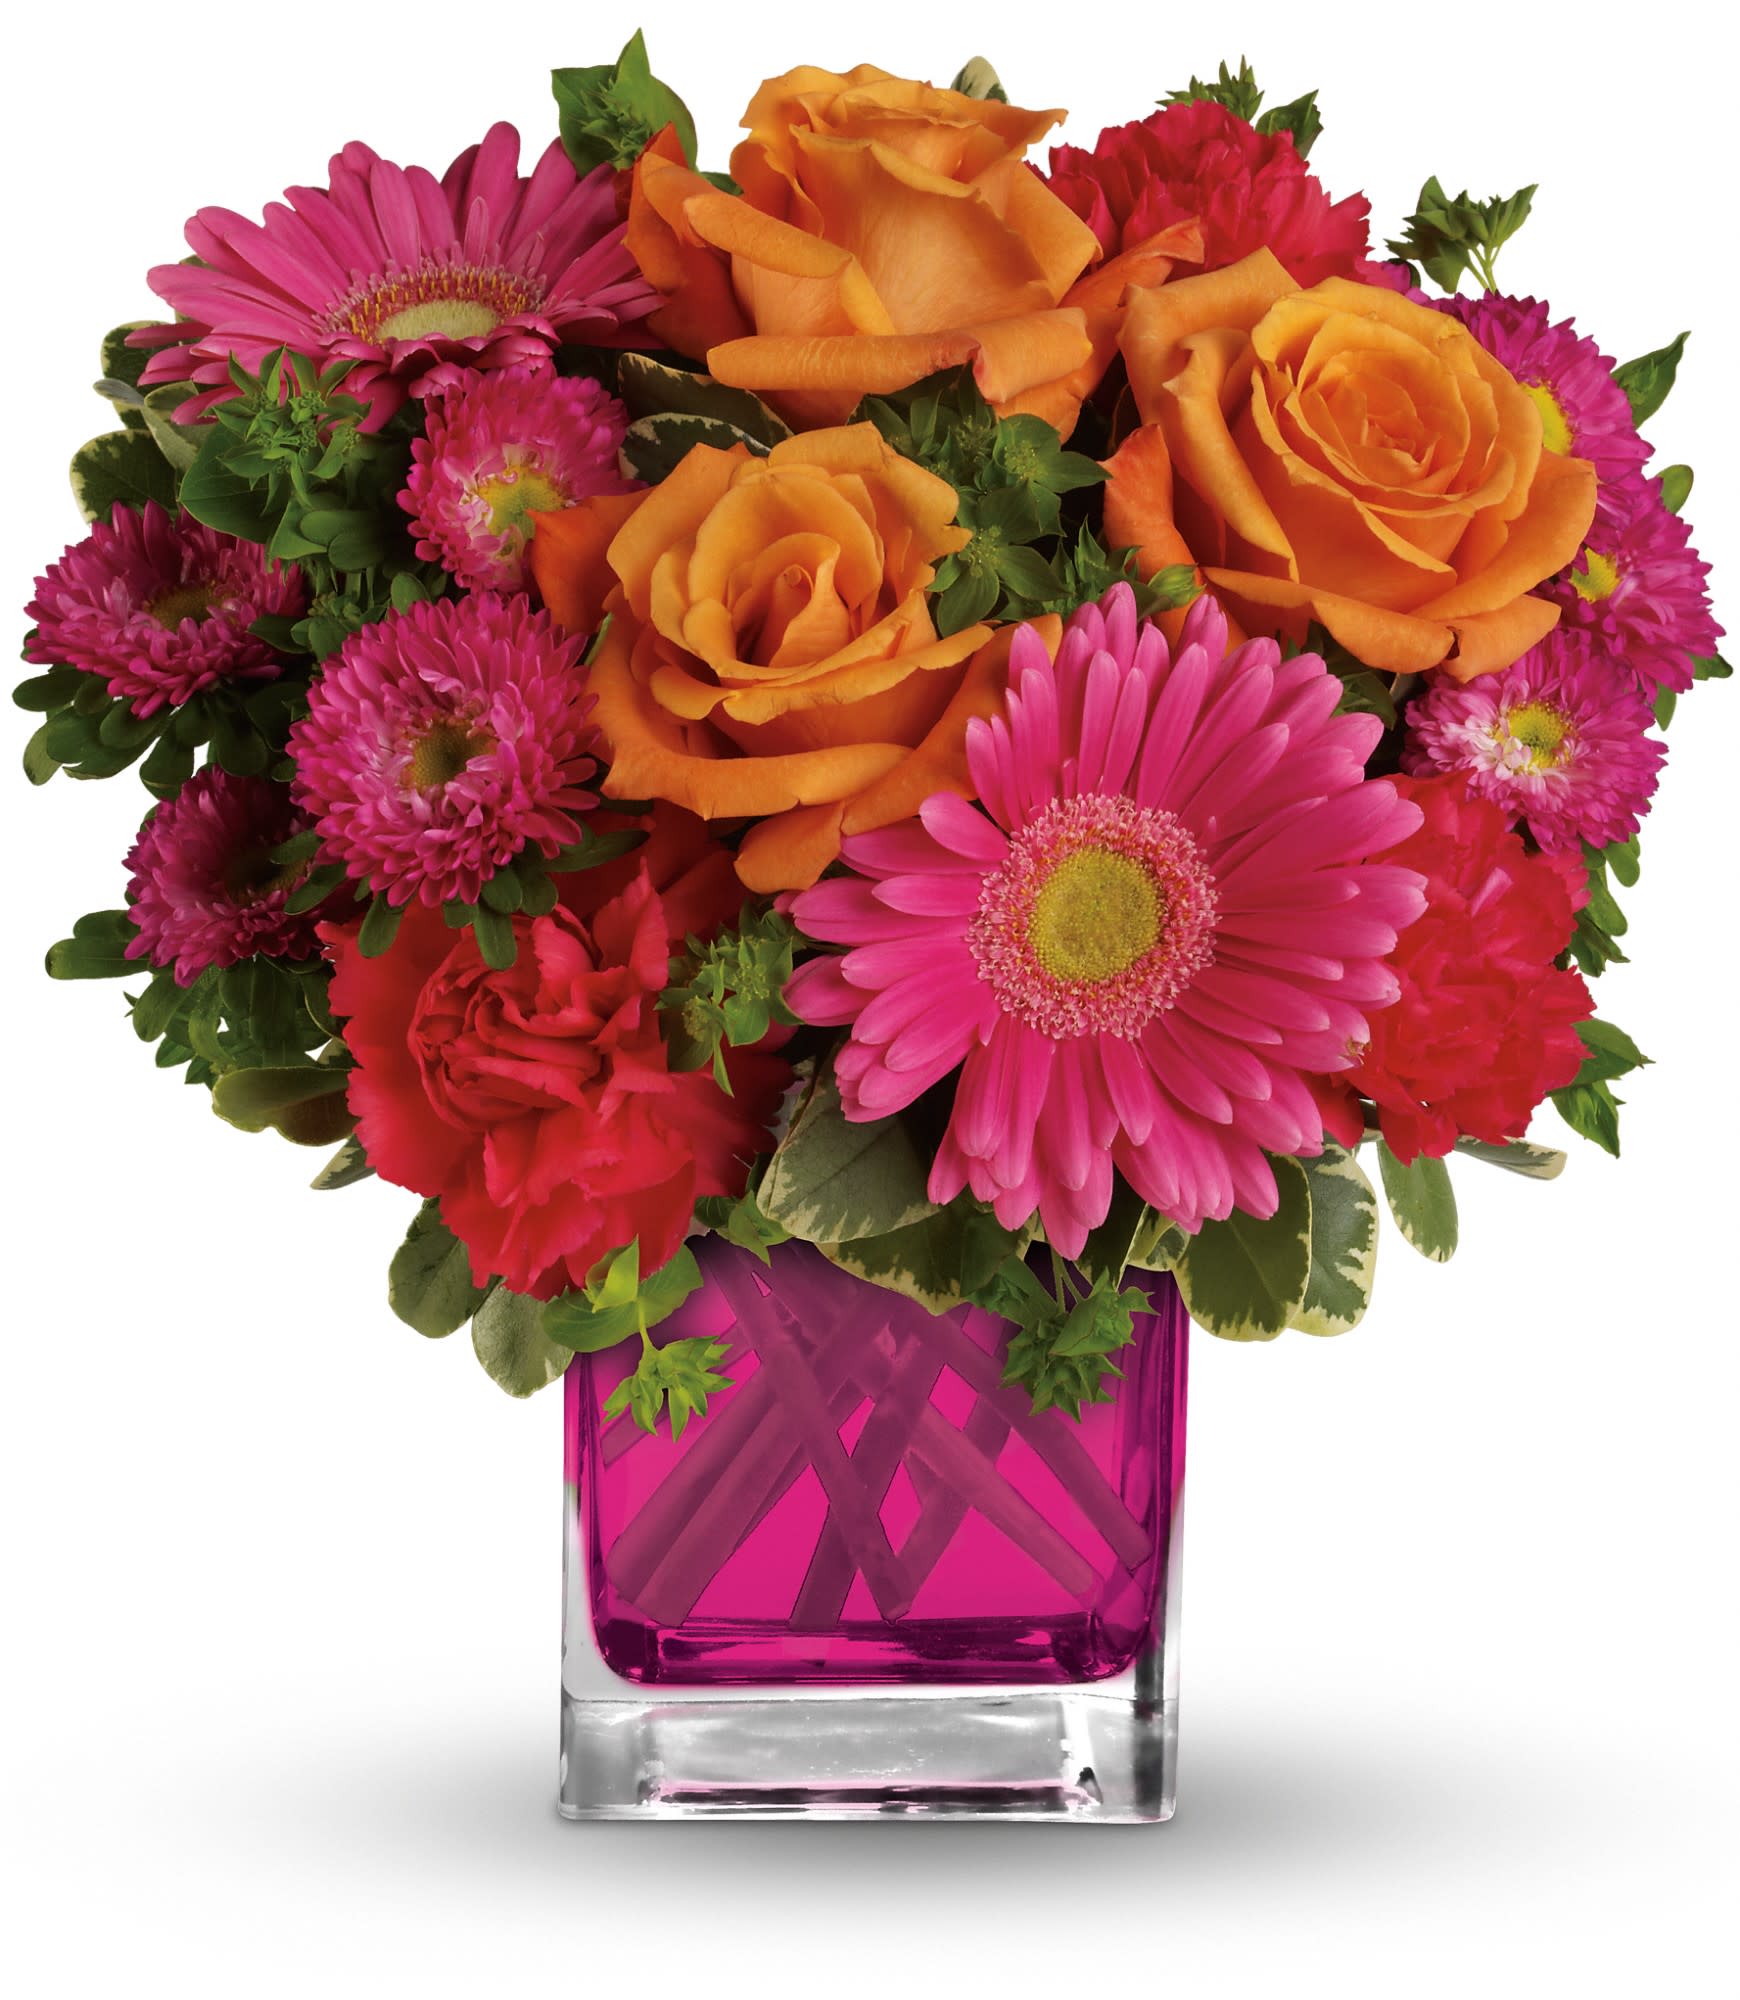 Teleflora's Turn Up The Pink Bouquet (TEV33-1A) - Turn up the heat with this hot pink, haute couture creation! Super chic and oh-so-fun in its fuchsia Cube vase, this girly mix of gerberas and roses is sure to warm her heart. 